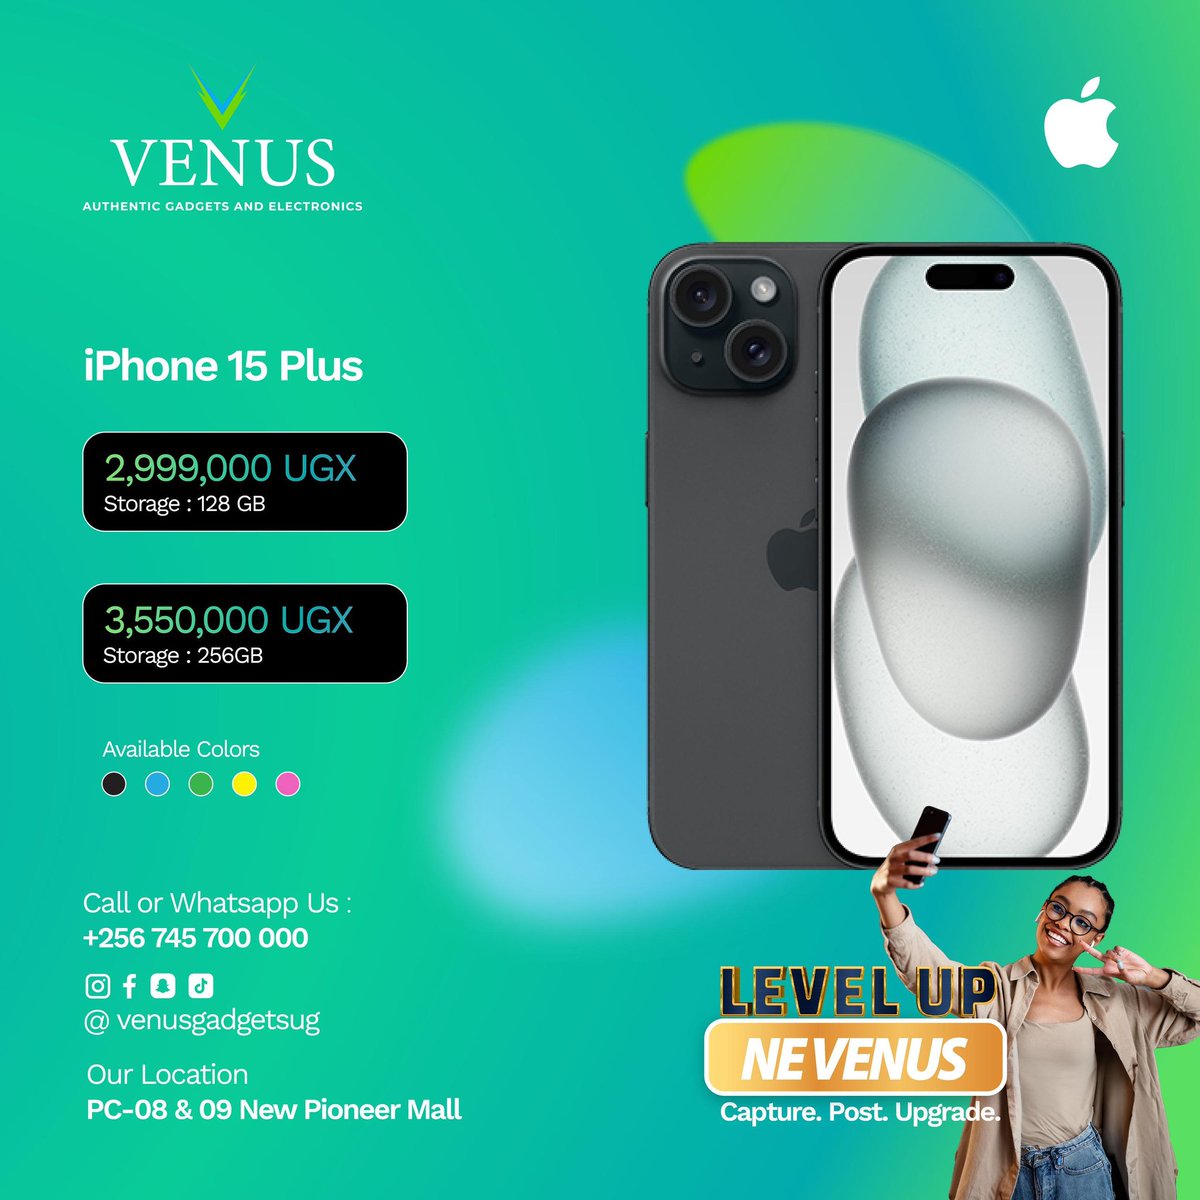 Choose wisely🤗
Me           OR           Iphone 15 Plus?
#LevelupneVenus